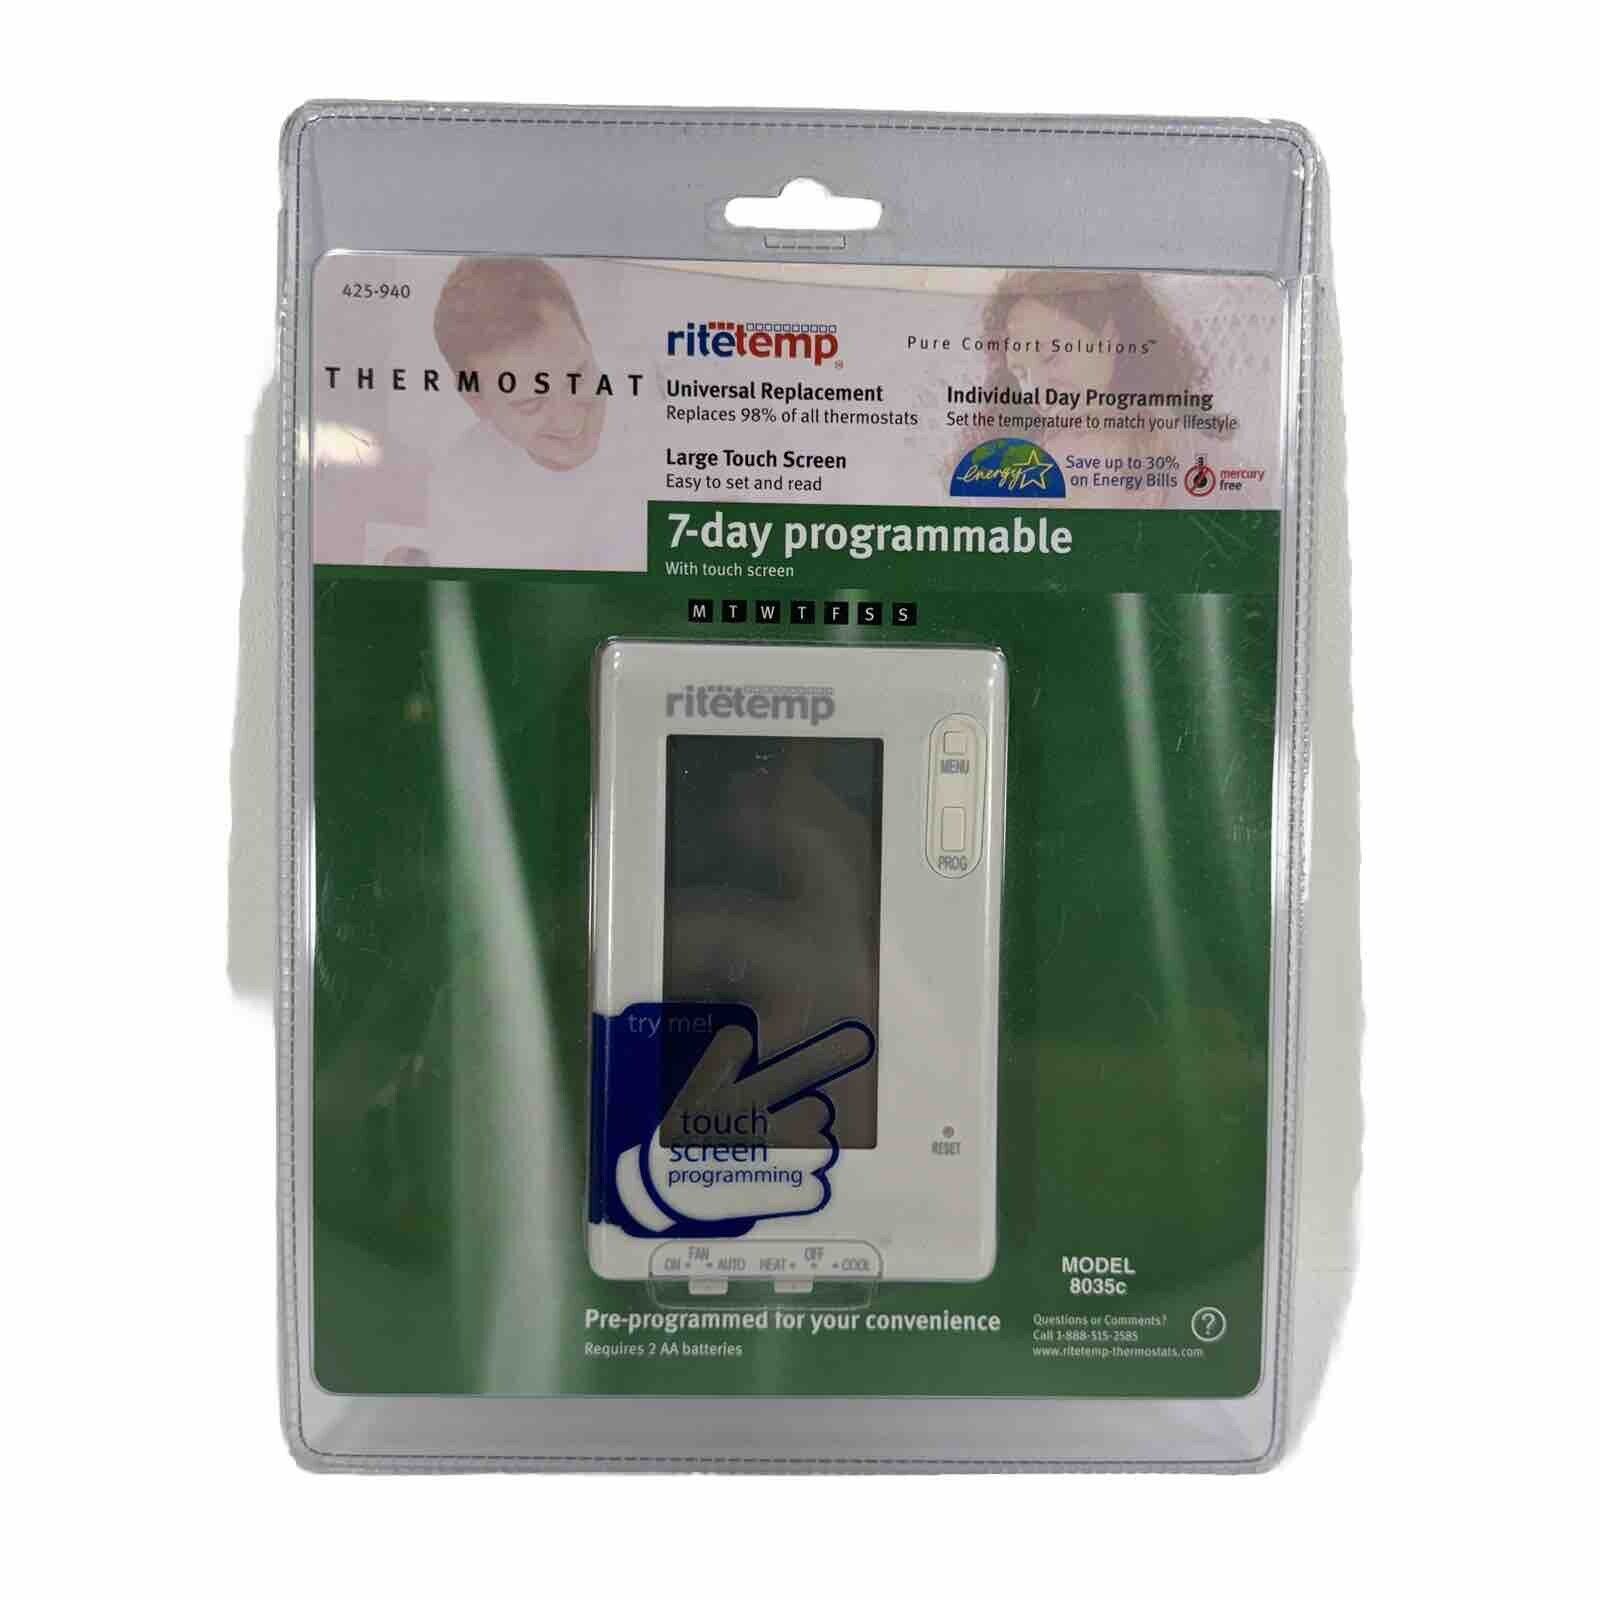 RiteTemp Thermostat 7-Day Programmable Touch Screen Model 8035C - Open Box